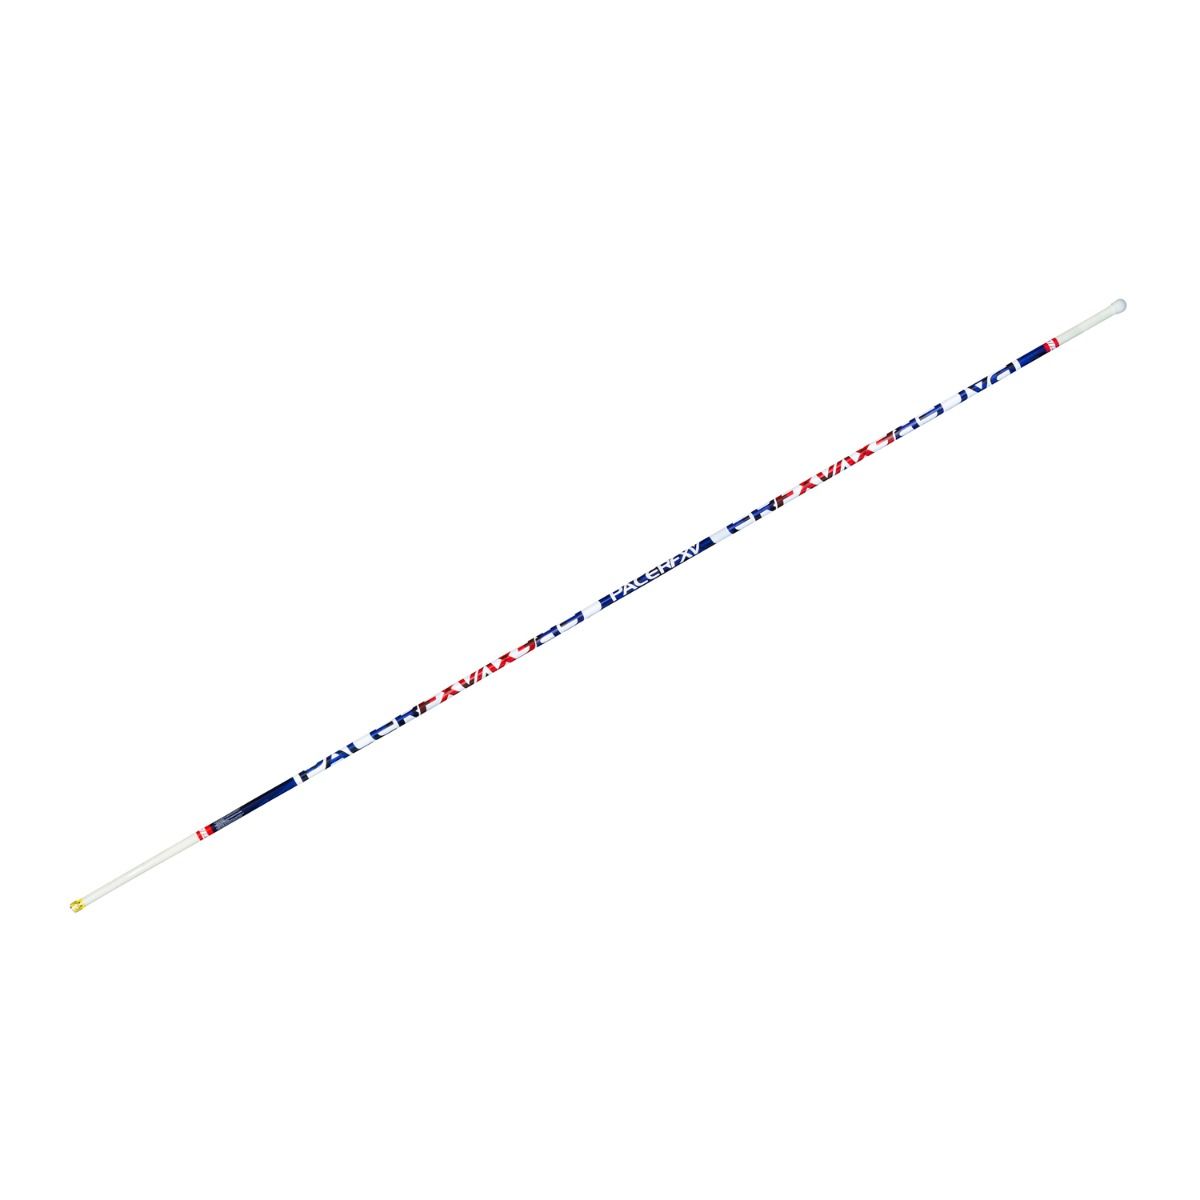 Gill PacerFXV 15' 6" Vaulting Pole